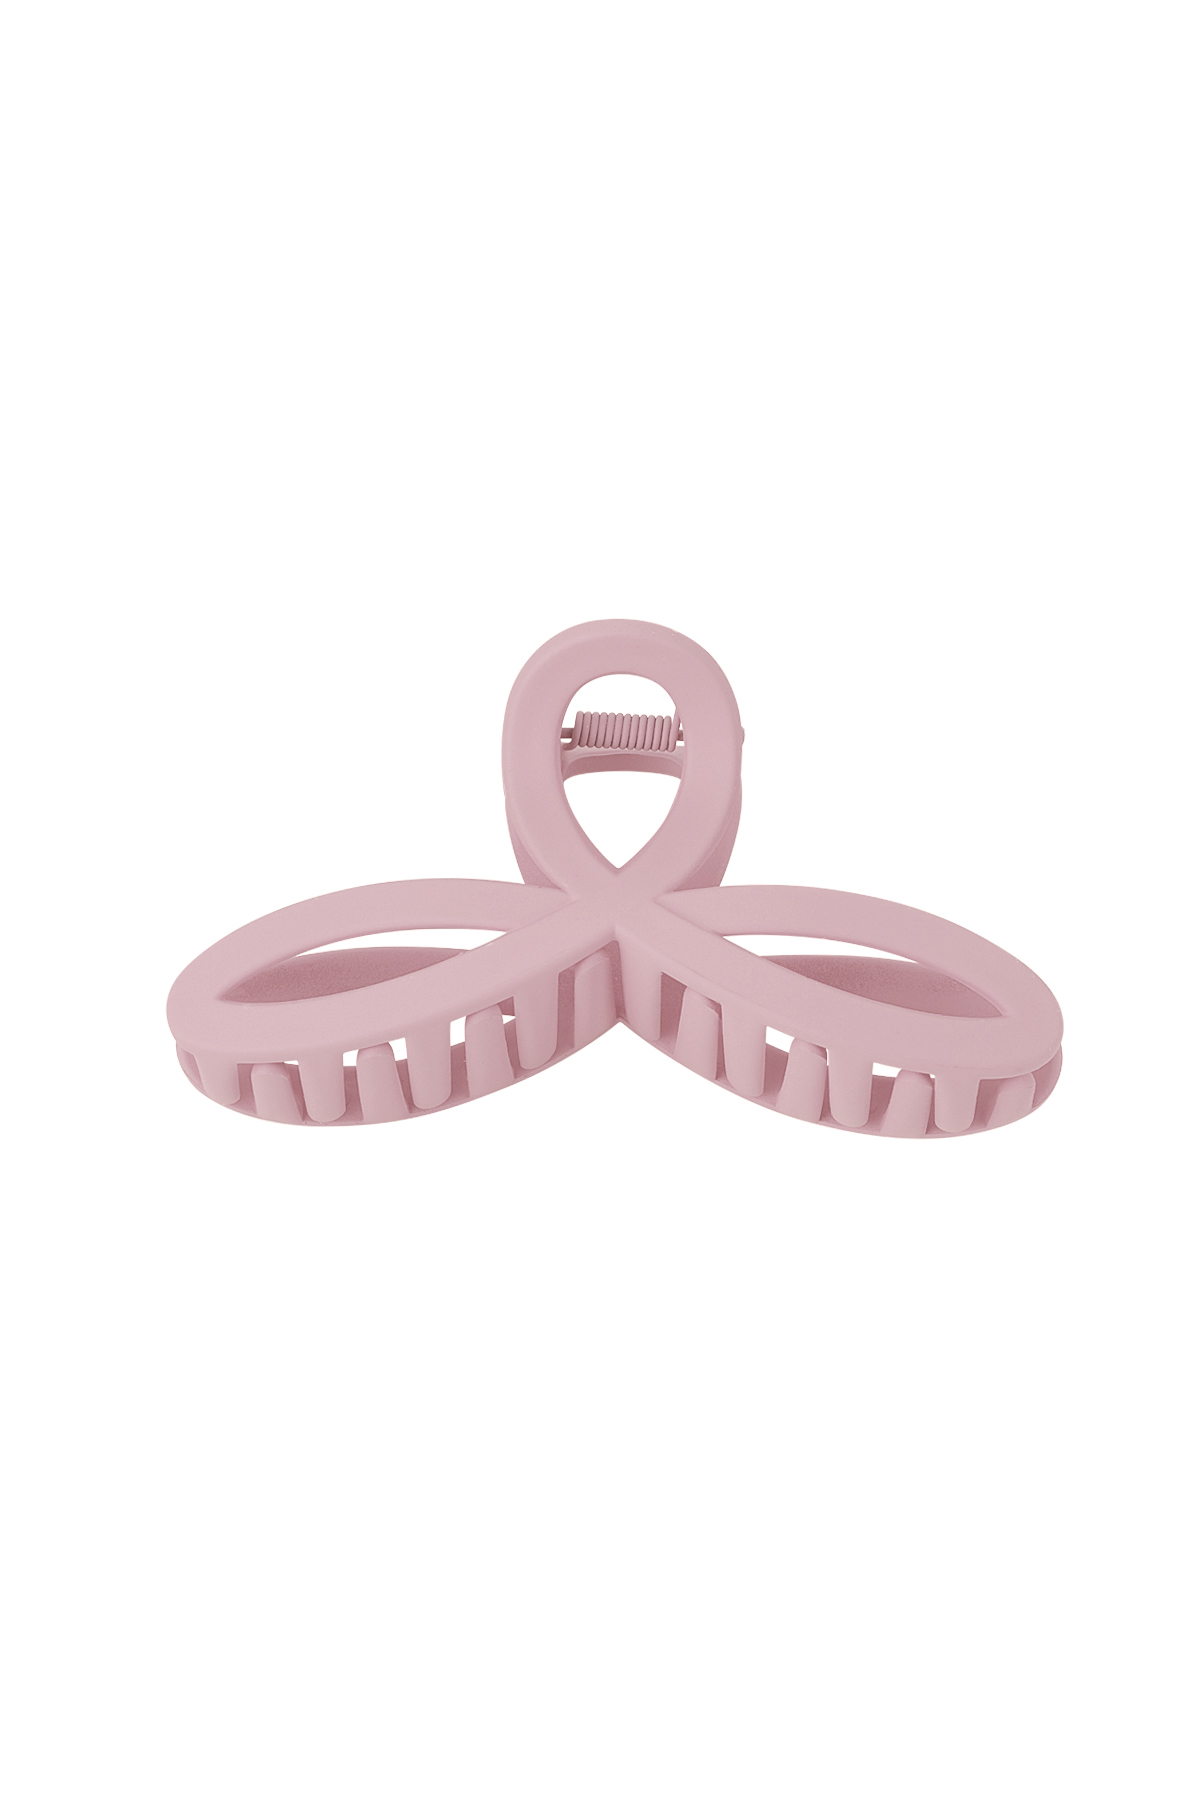 Hair clip cheerful - pastel pink Plastic h5 